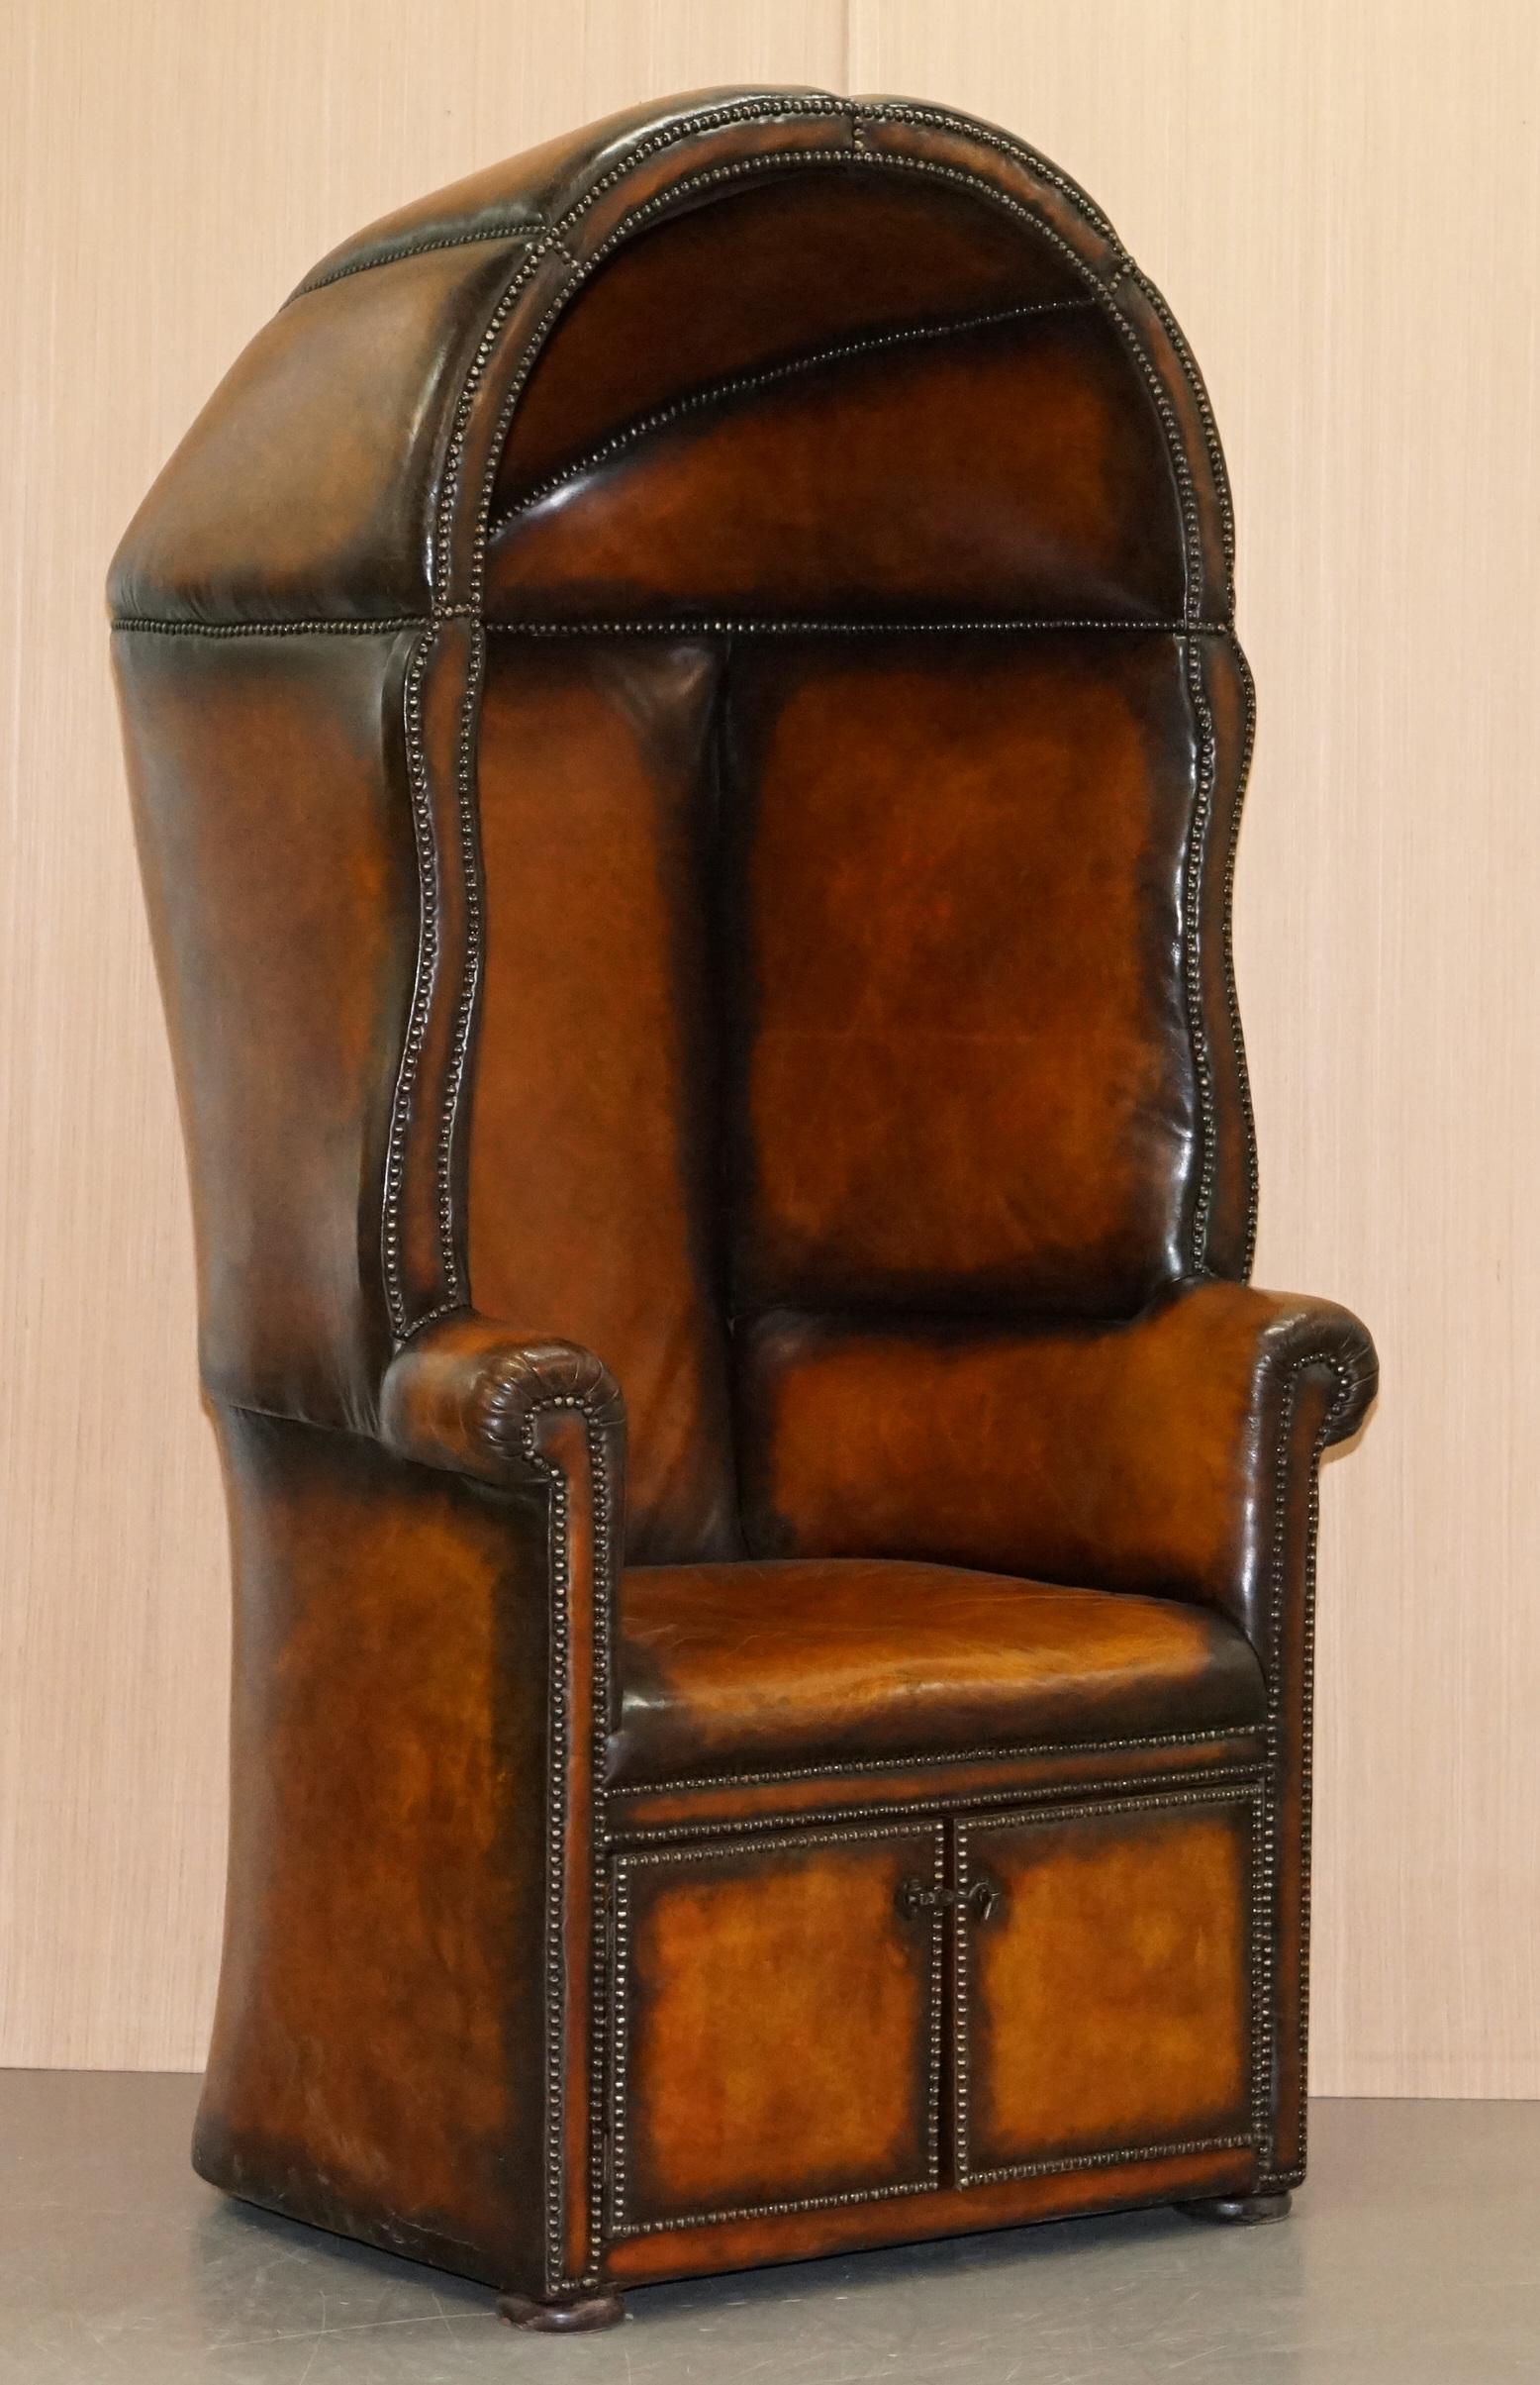 We are delighted to offer for sale this stunning very rare hand dyed brown leather Regency / Victorian full Porters armchair

An absolute diamond of an armchair, this is a full porters so it has the canopy top which is fully fluted both inside and